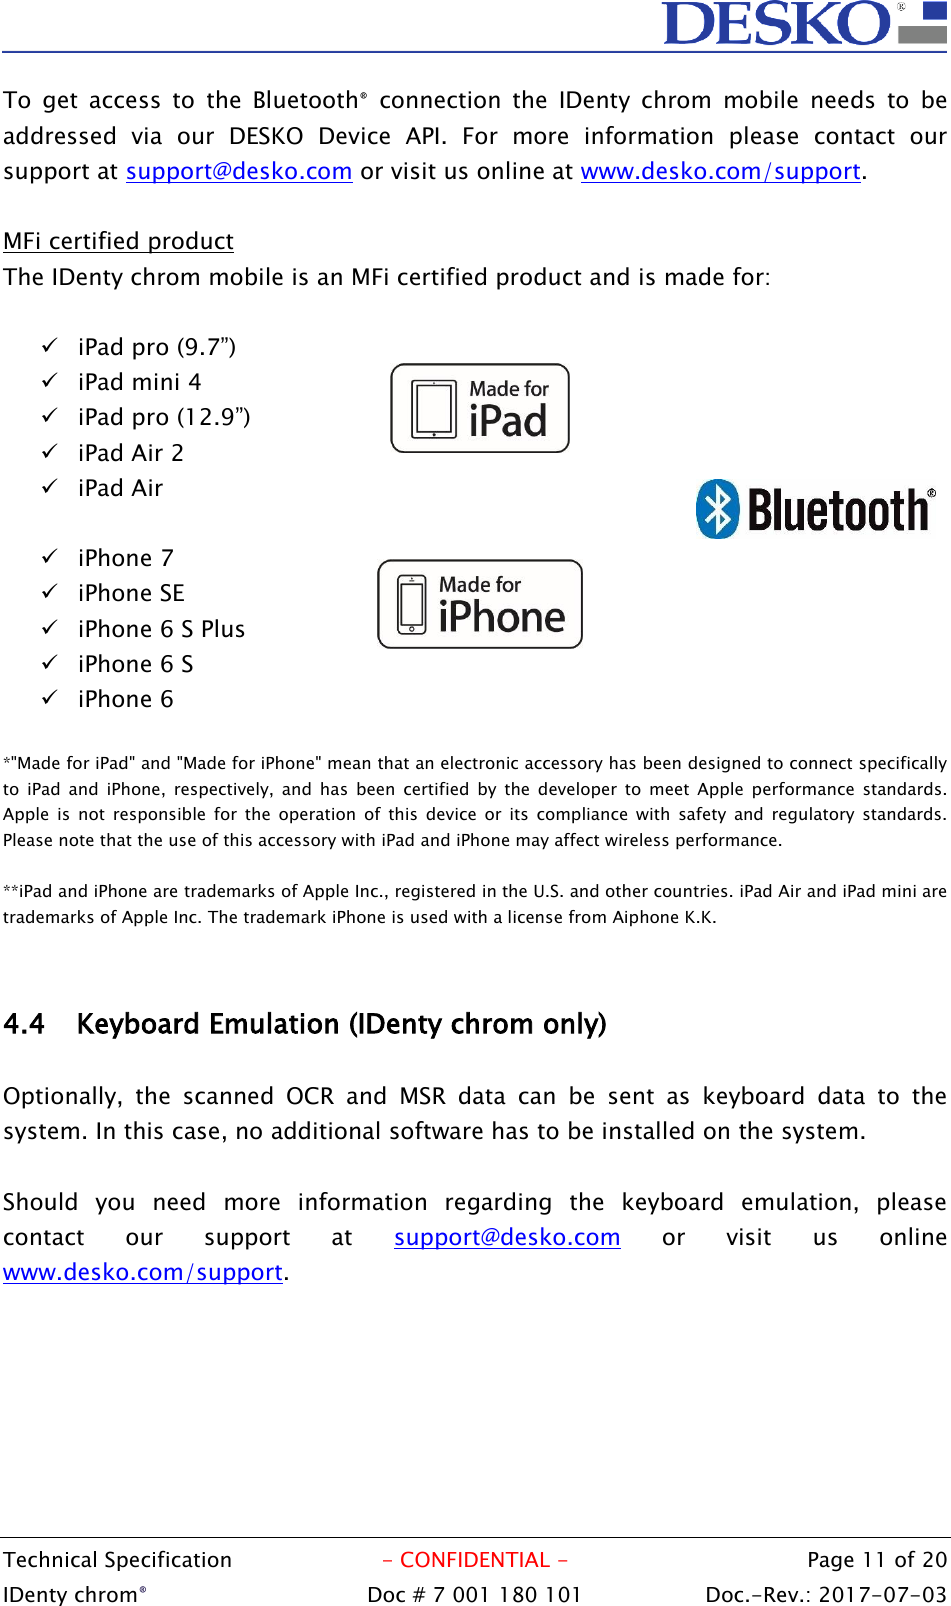  Technical Specification  - CONFIDENTIAL -  Page 11 of 20 IDenty chrom®  Doc # 7 001 180 101   Doc.-Rev.: 2017-07-03   To  get  access  to  the  Bluetooth®  connection  the  IDenty  chrom  mobile  needs  to  be addressed  via  our  DESKO  Device  API.  For  more  information  please  contact  our support at support@desko.com or visit us online at www.desko.com/support.   MFi certified product The IDenty chrom mobile is an MFi certified product and is made for:   iPad pro (9.7”)  iPad mini 4  iPad pro (12.9”)  iPad Air 2  iPad Air   iPhone 7  iPhone SE  iPhone 6 S Plus  iPhone 6 S  iPhone 6  *&quot;Made for iPad&quot; and &quot;Made for iPhone&quot; mean that an electronic accessory has been designed to connect specifically to  iPad  and  iPhone,  respectively, and  has  been  certified  by  the  developer  to  meet  Apple  performance  standards. Apple  is  not  responsible  for  the  operation  of  this  device  or  its  compliance  with  safety  and  regulatory  standards. Please note that the use of this accessory with iPad and iPhone may affect wireless performance.  **iPad and iPhone are trademarks of Apple Inc., registered in the U.S. and other countries. iPad Air and iPad mini are trademarks of Apple Inc. The trademark iPhone is used with a license from Aiphone K.K.   4.4 Keyboard Emulation (IDenty chrom only)  Optionally,  the  scanned  OCR  and  MSR  data  can  be  sent  as  keyboard  data  to  the system. In this case, no additional software has to be installed on the system.  Should  you  need  more  information  regarding  the  keyboard  emulation,  please contact  our  support  at  support@desko.com  or  visit  us  online www.desko.com/support. 